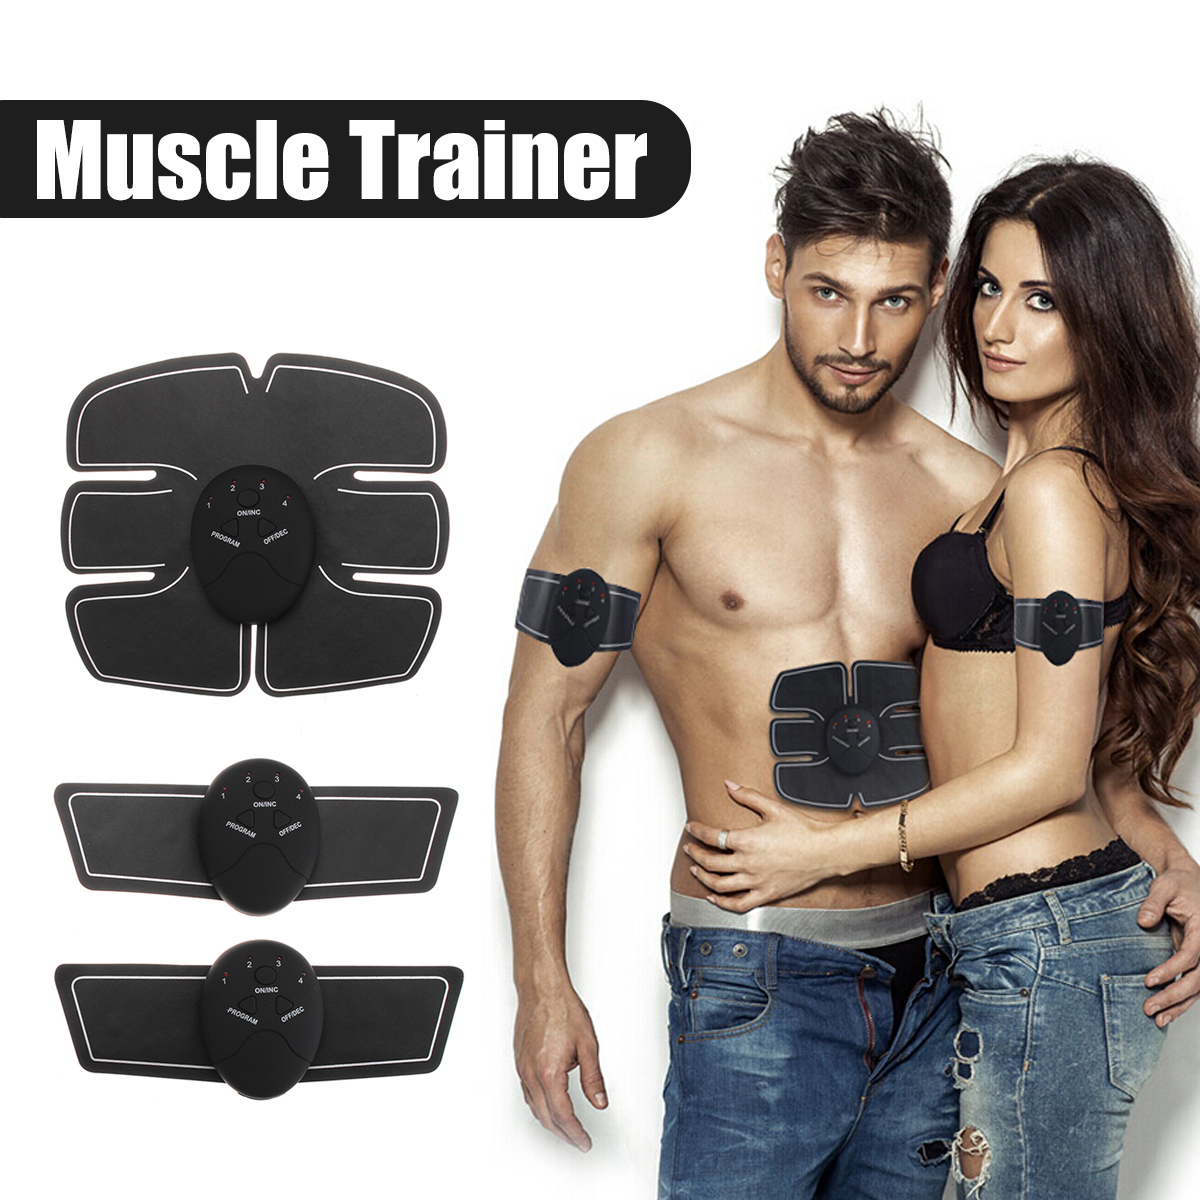 6-Modes-Smart-Abdominal-Muscle-Trainer-Abdomen-Arm-Shoulder-Strength-Fitness-Exercise-Tool-ABS-Stimu-1642922-2